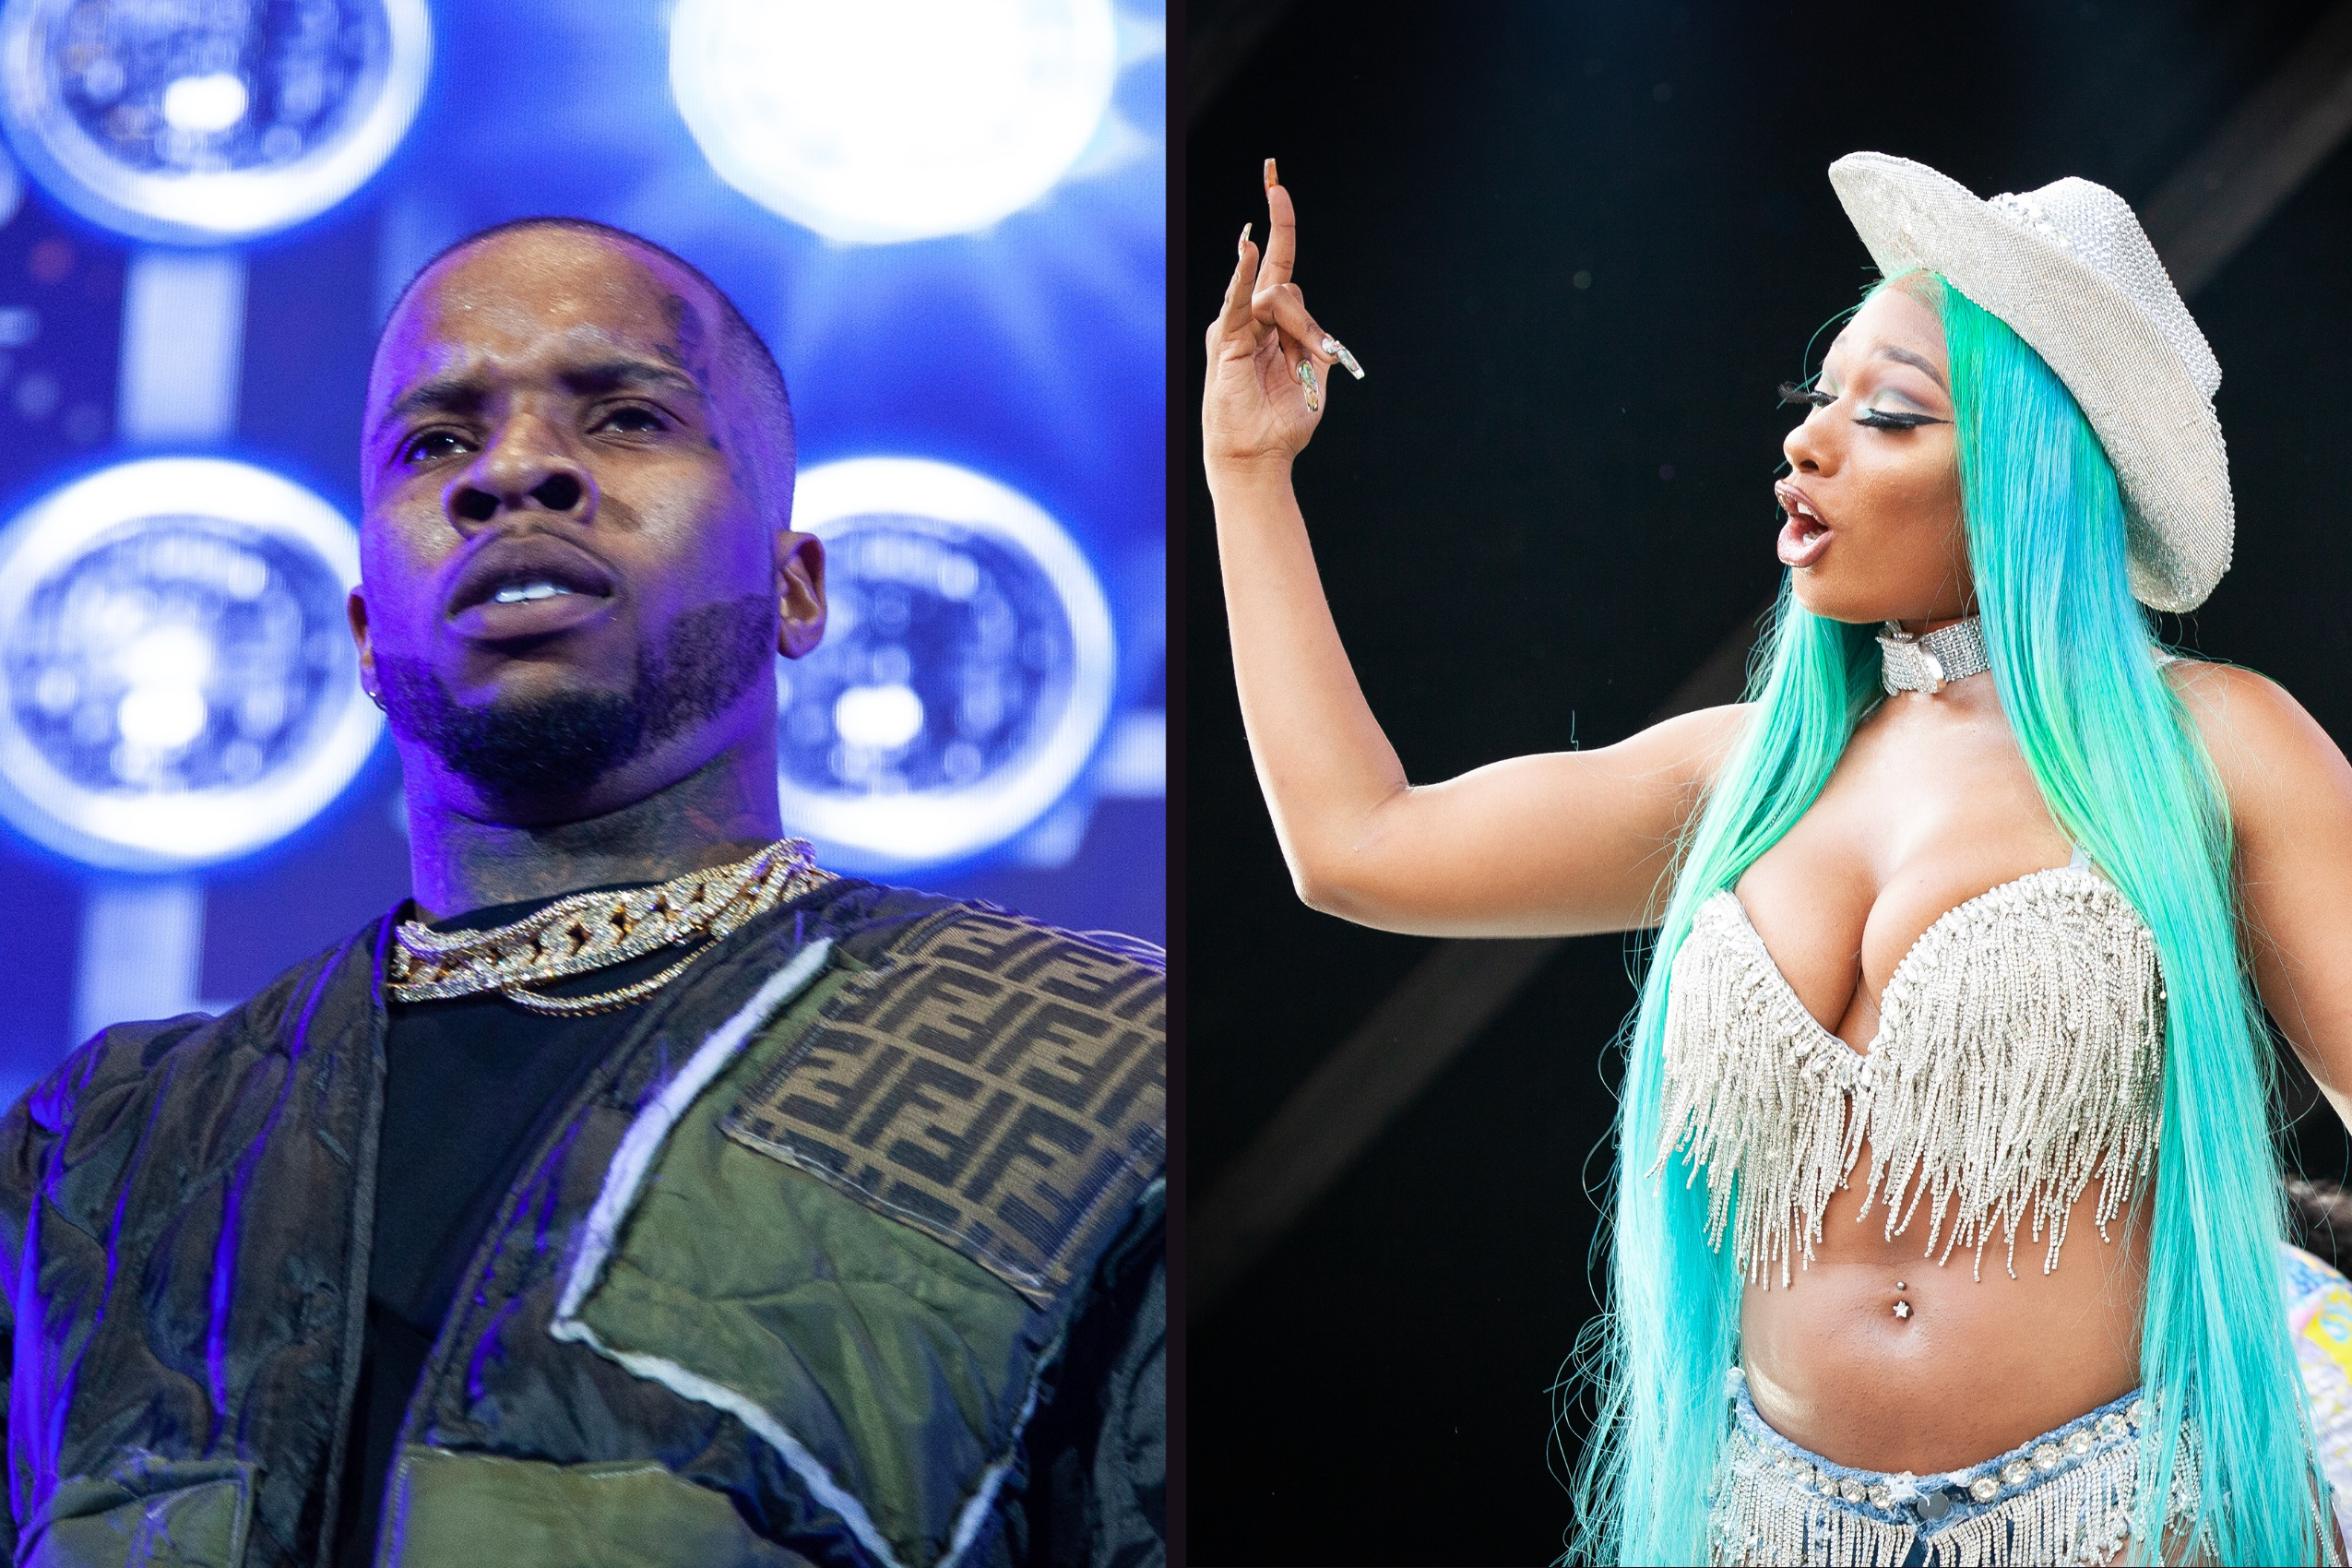 Adam 22 Claims Tory Lanez Shot Megan Thee Stallion Because of Kylie Jenner